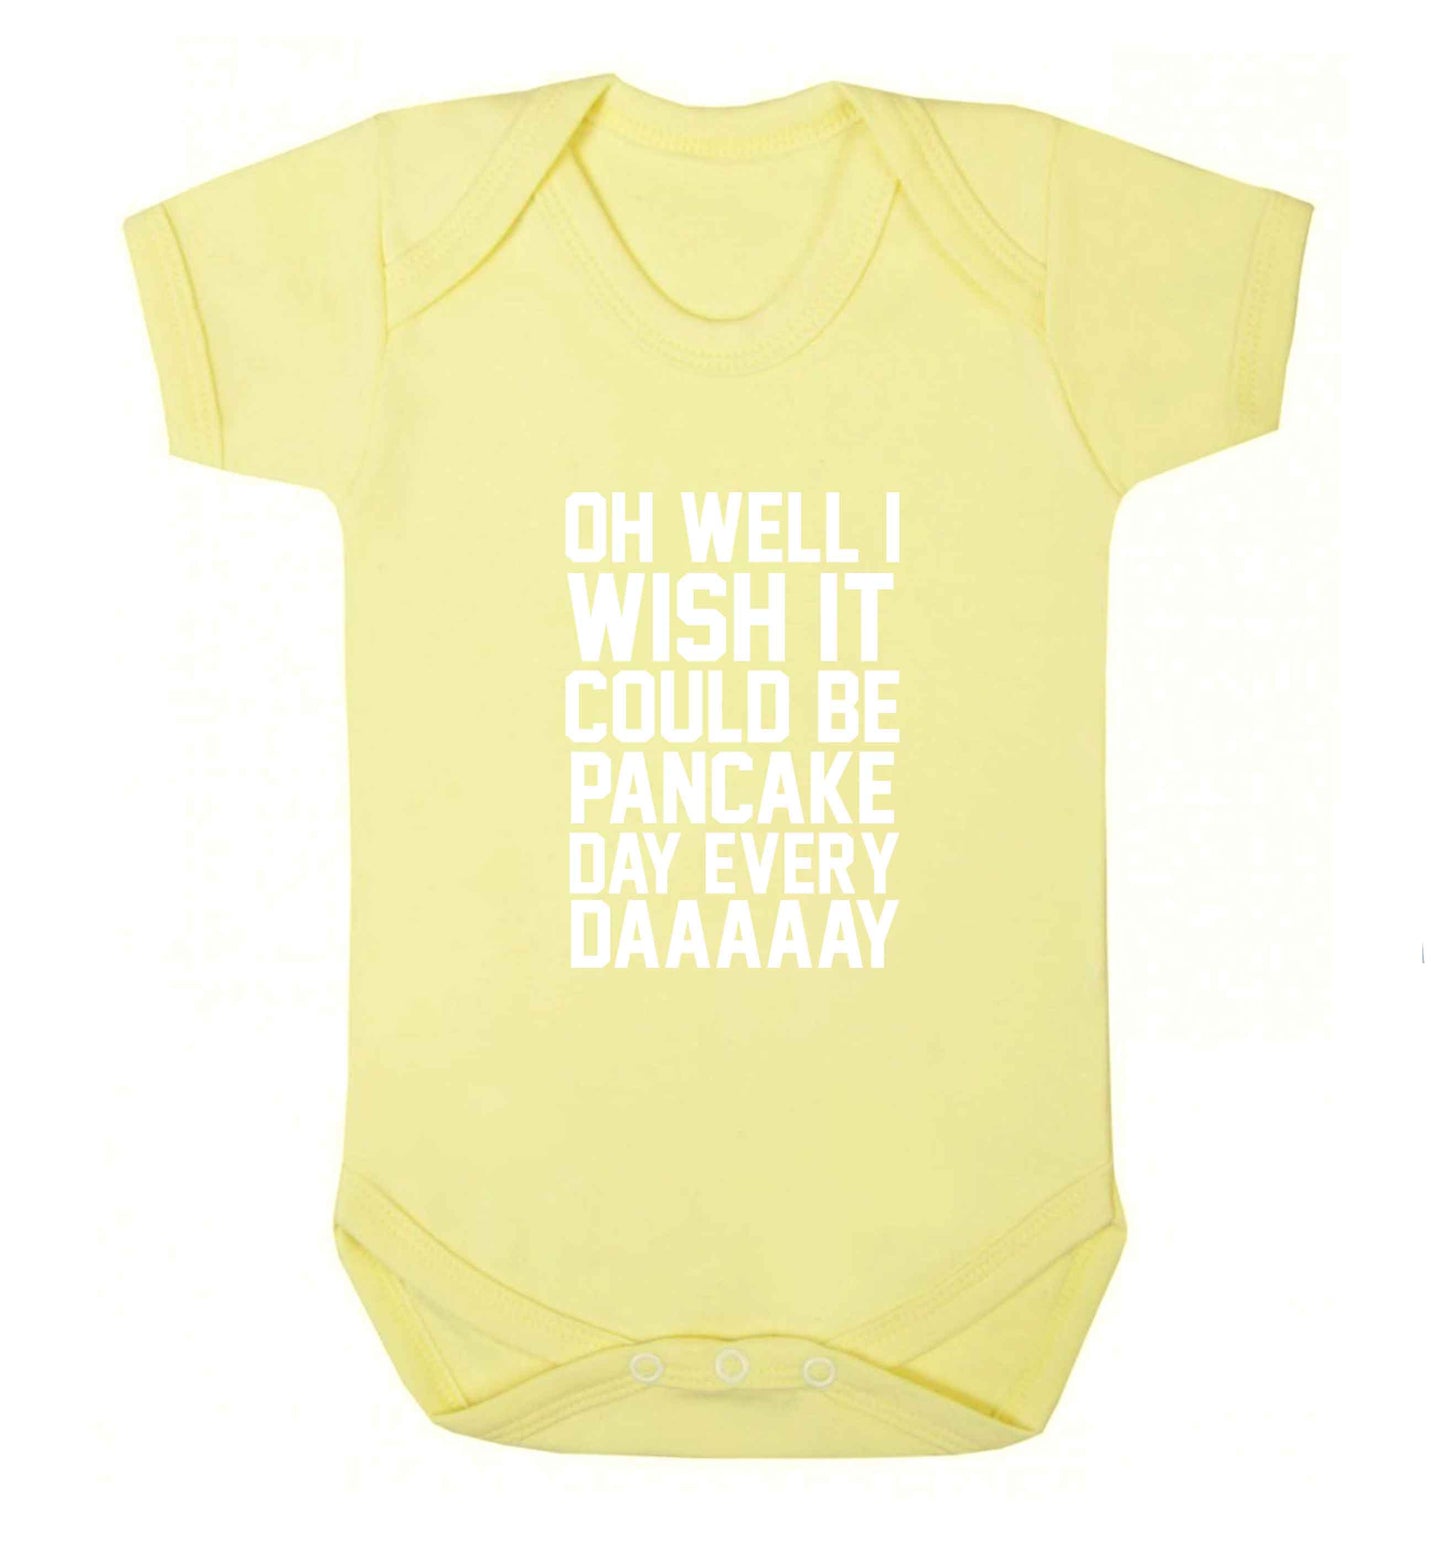 Oh well I wish it could be pancake day every day baby vest pale yellow 18-24 months